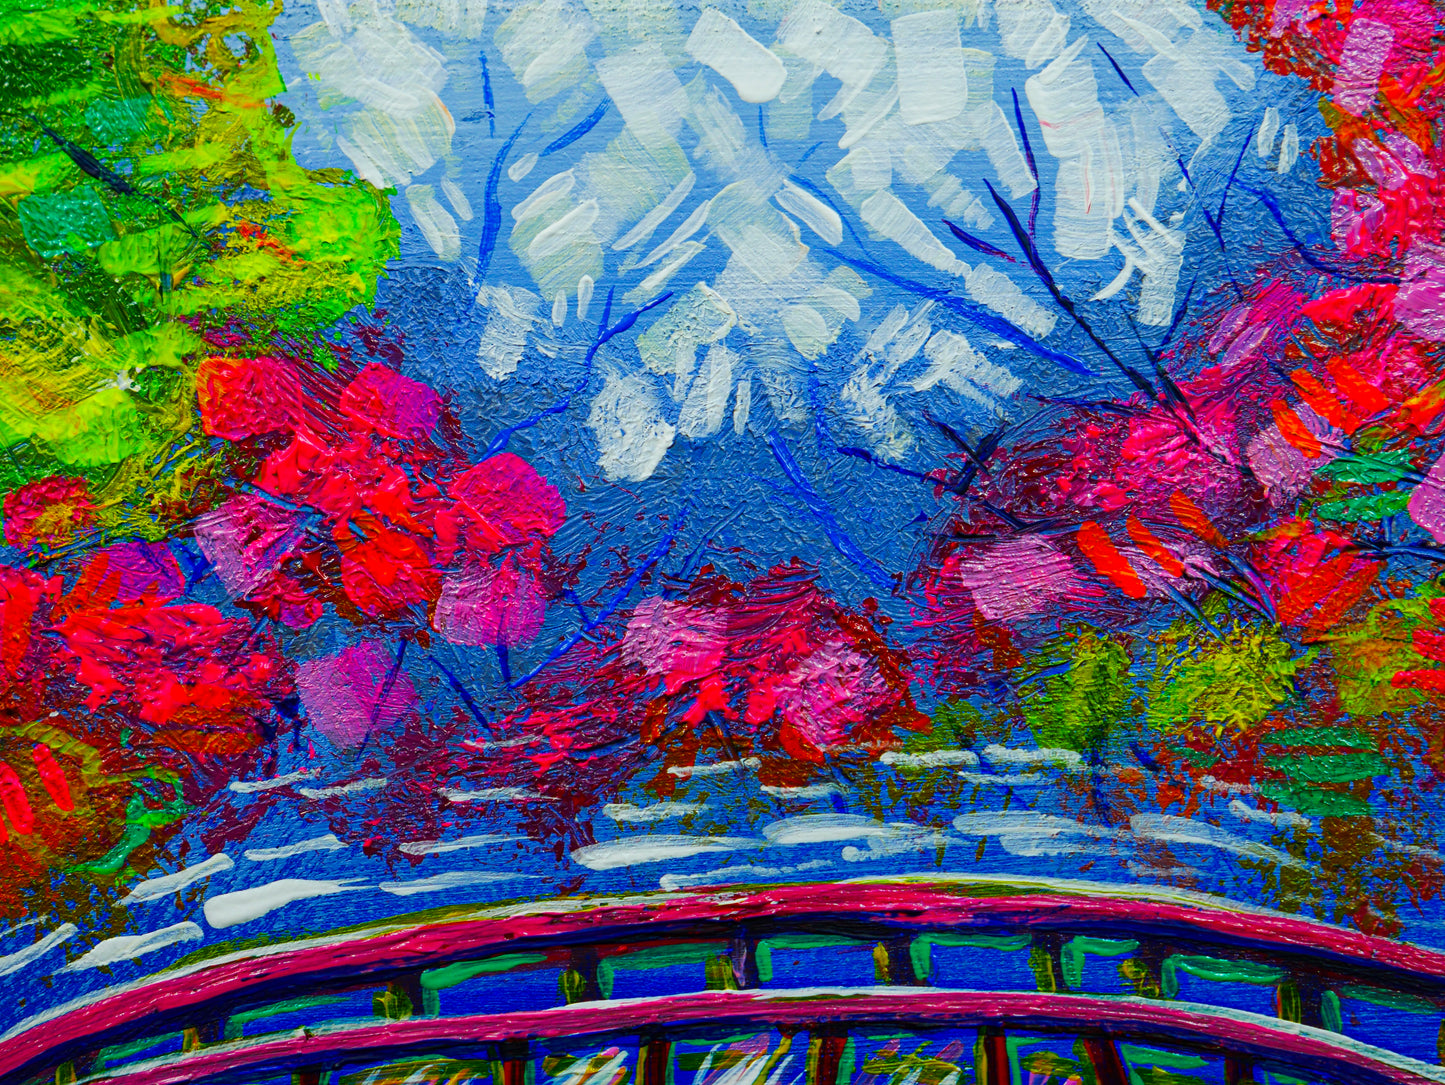 5x7 inch Spring in Japan Inspired Original Acrylic Painting